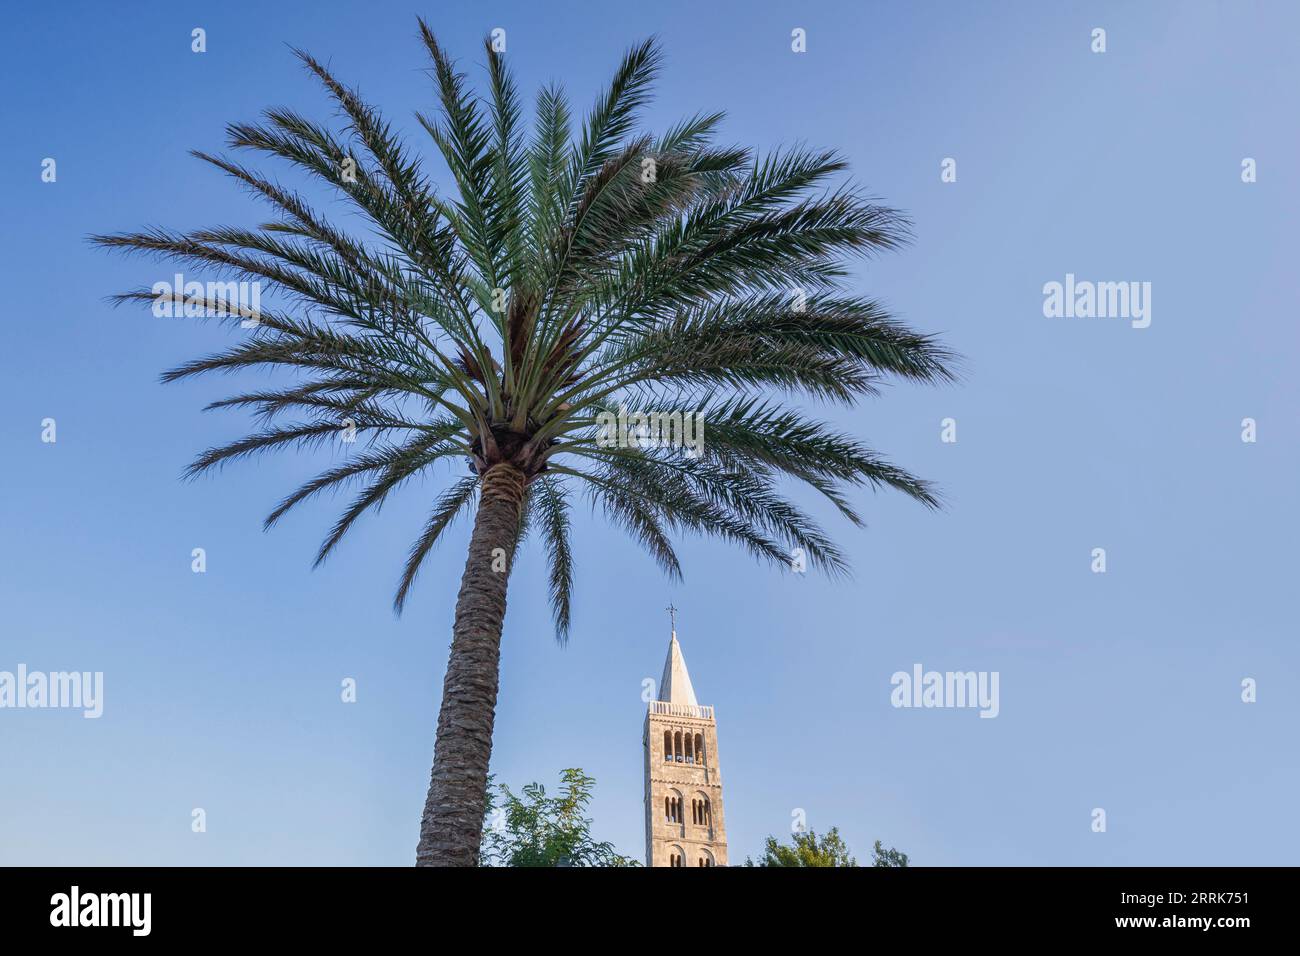 Europe, Croatia, Primorje-Gorski Kotar County, Rab island, view of the bell towers of the Cathedral of the Assumption of Blessed Virgin Mary and a Palm tree in the old town of Rab Stock Photo